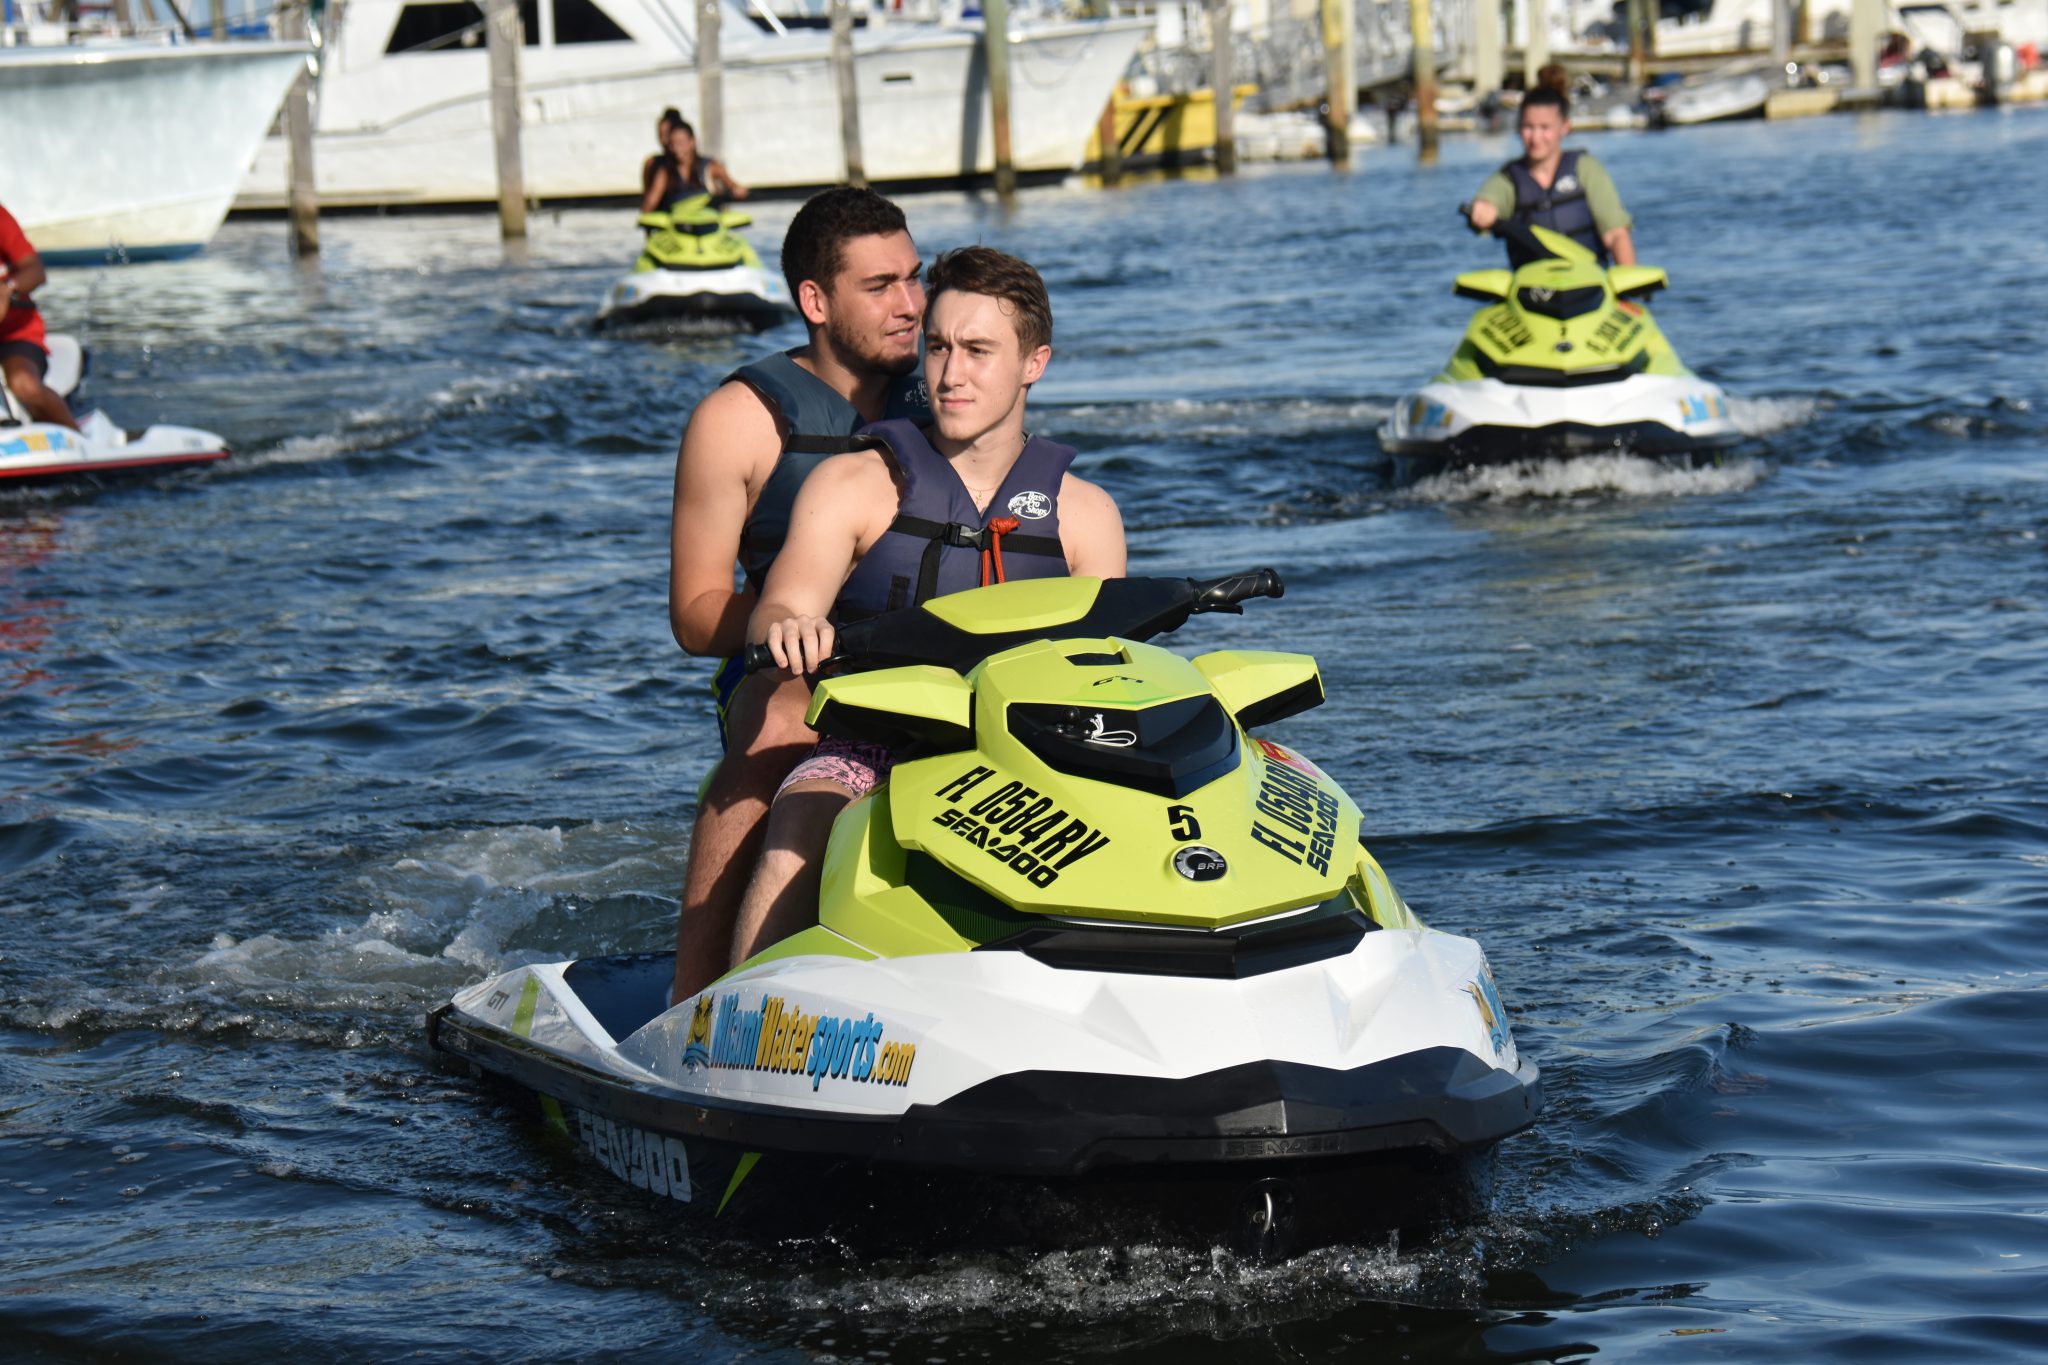 Maximizing Fun, Tips for Jet Skiing with Friends in Miami